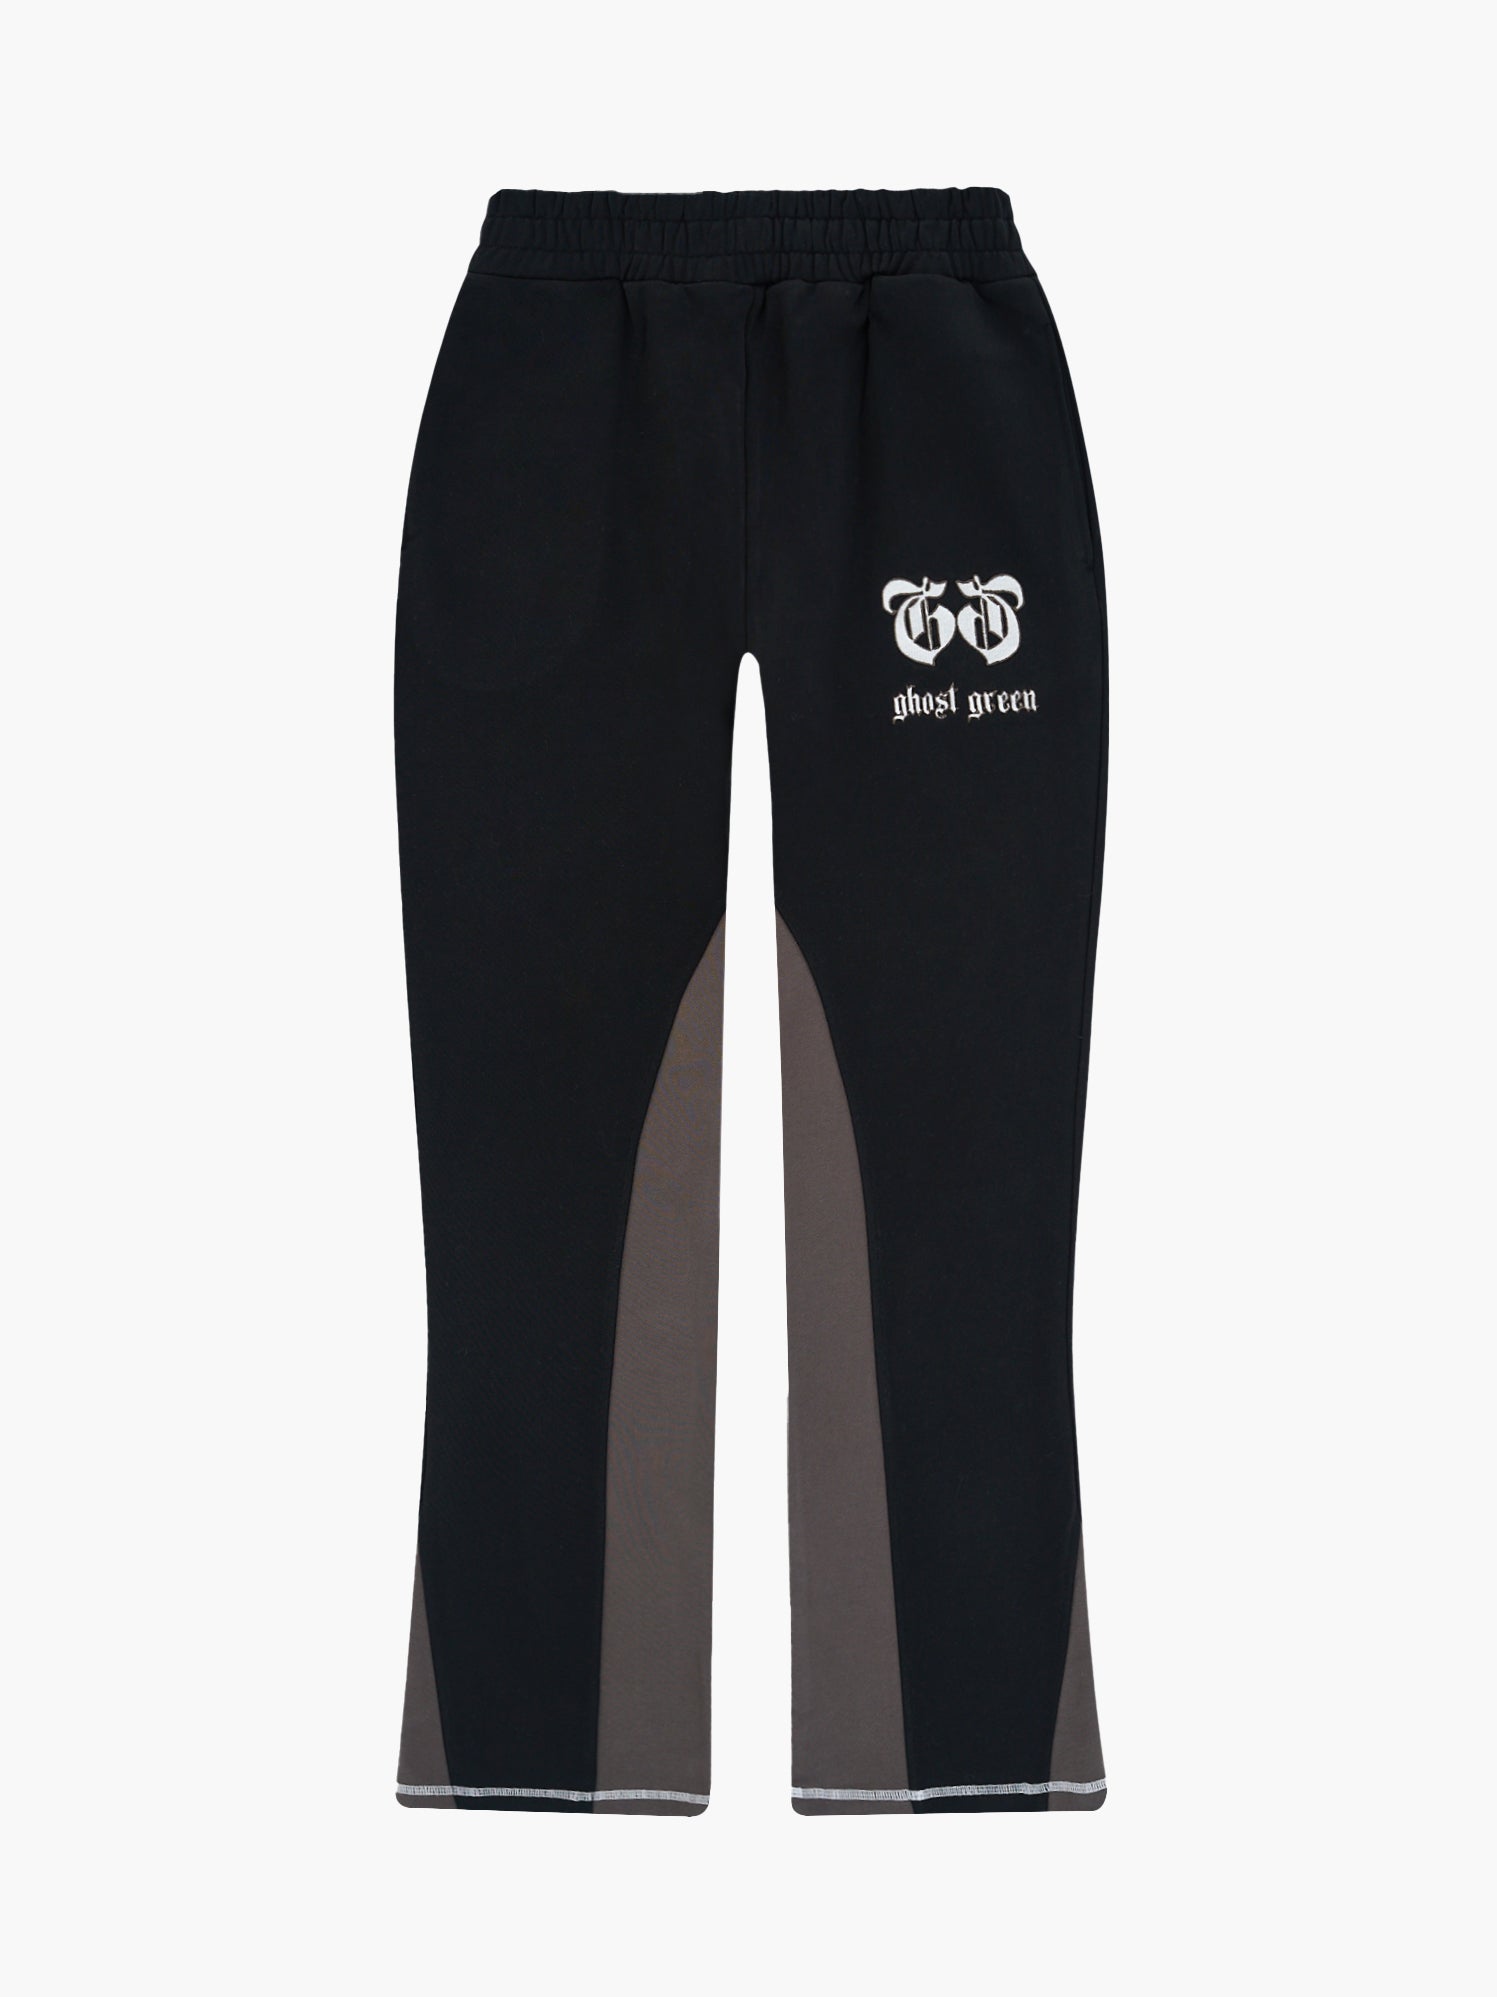 EXPRESS YOURSELF FLARE PANTS - BLACK